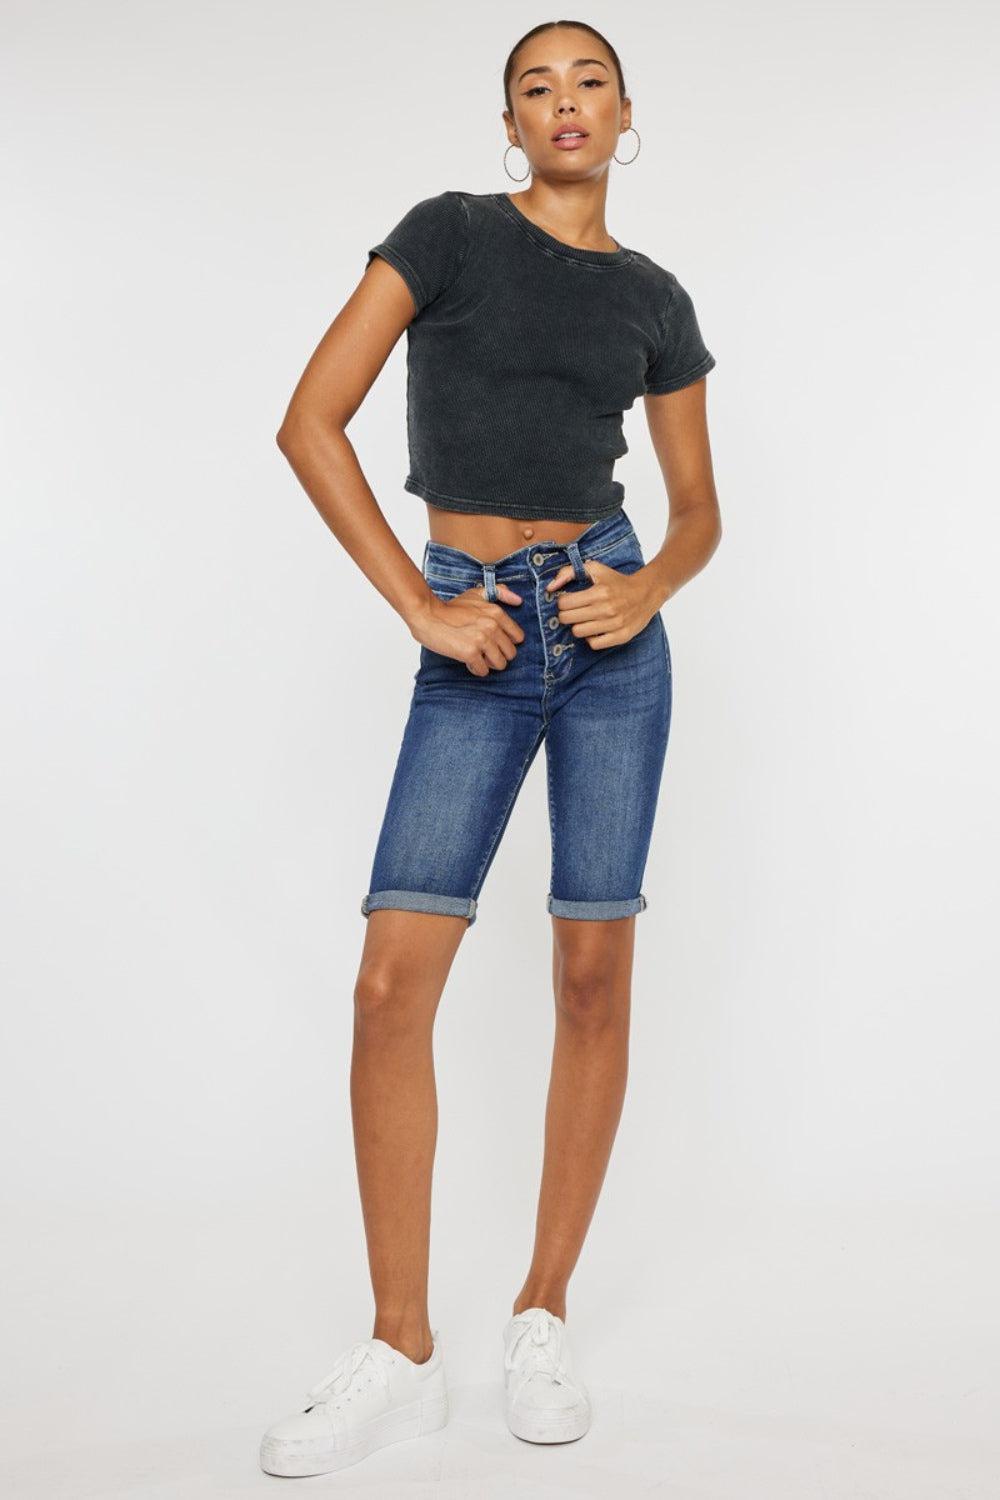 a woman in a black crop top and denim shorts